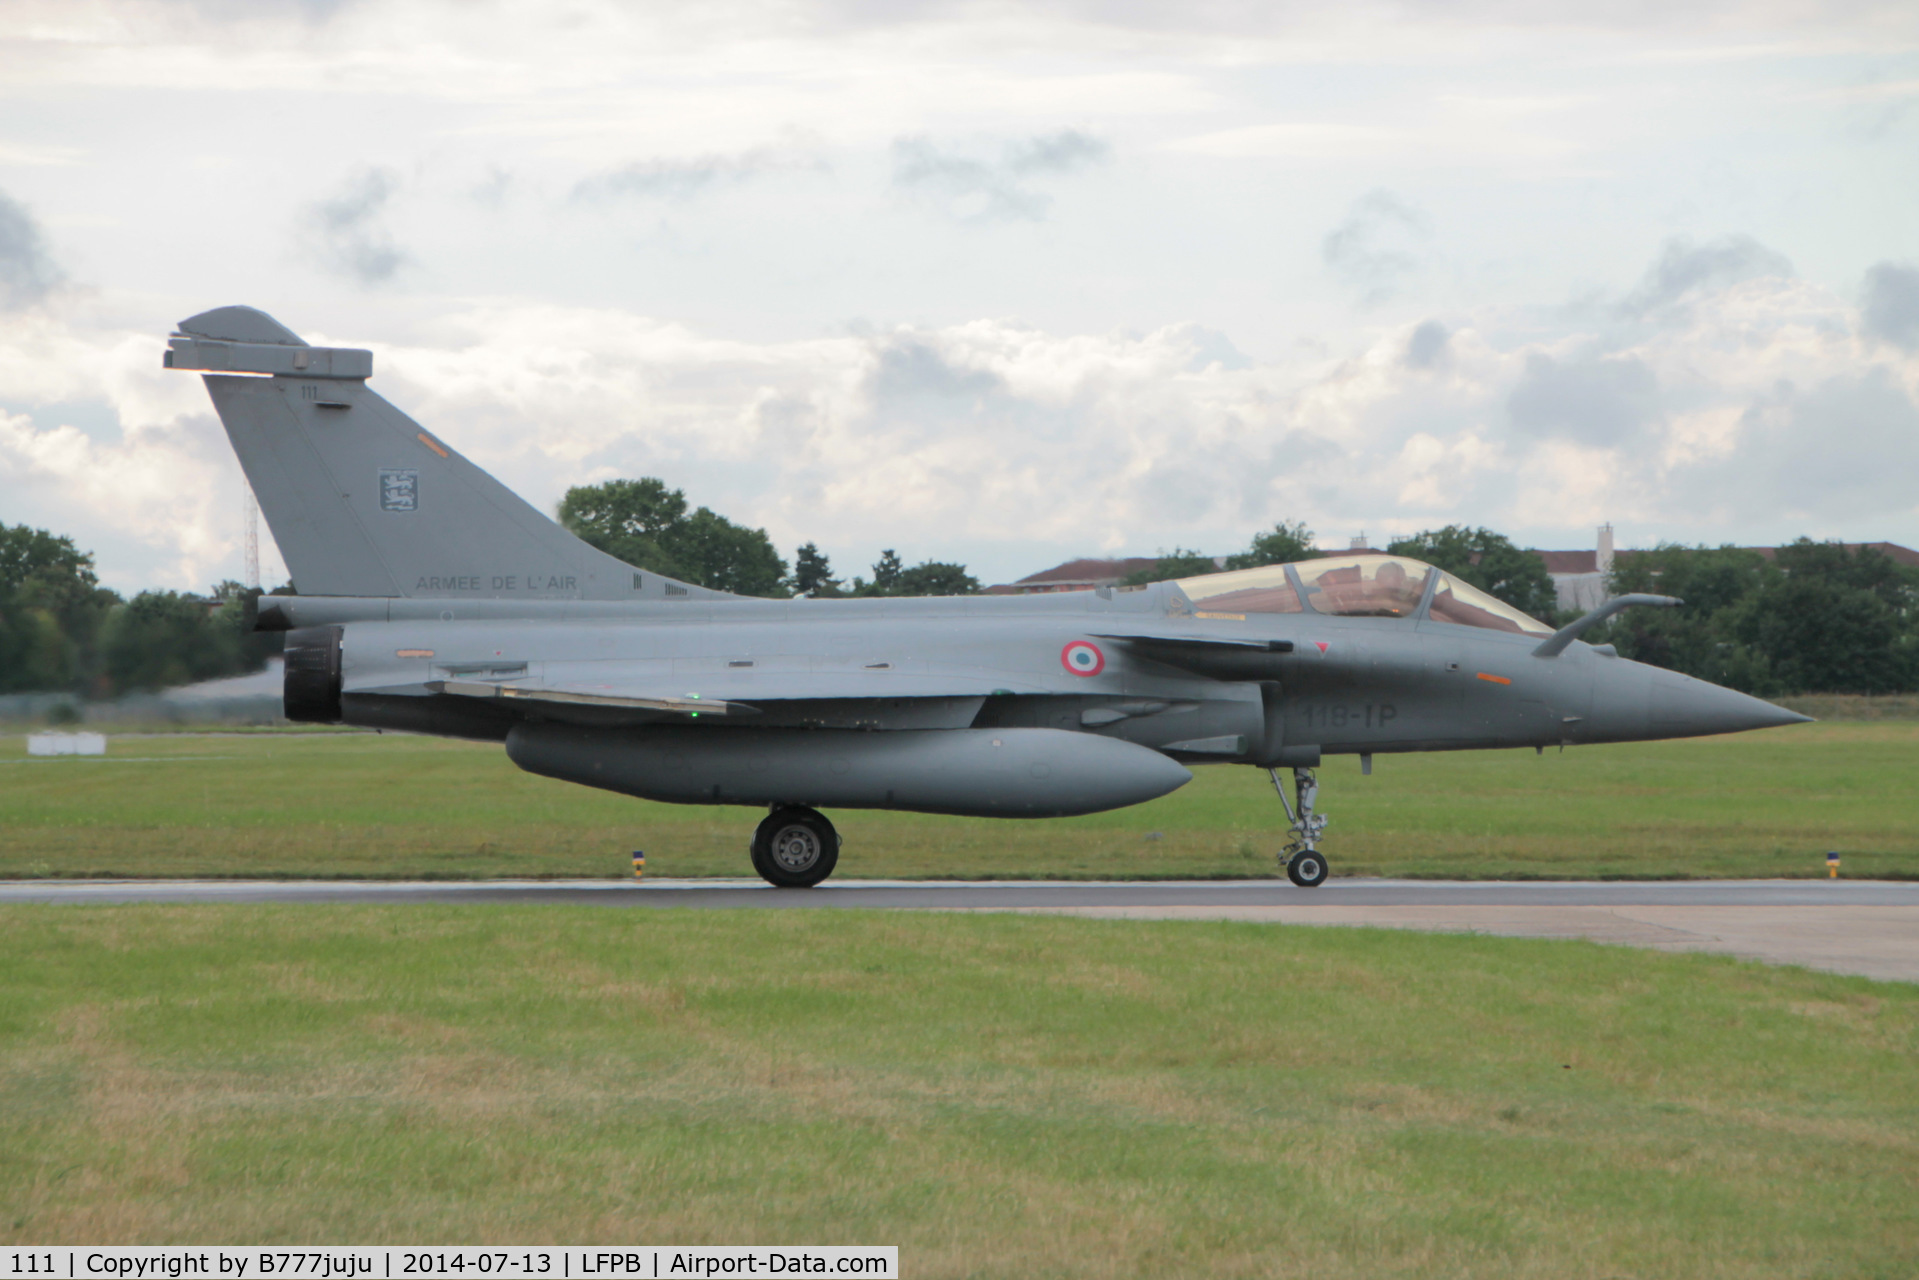 111, Dassault Rafale C C/N 075, at 100th anniversary of Le Bourget Airport
new code 118-IP